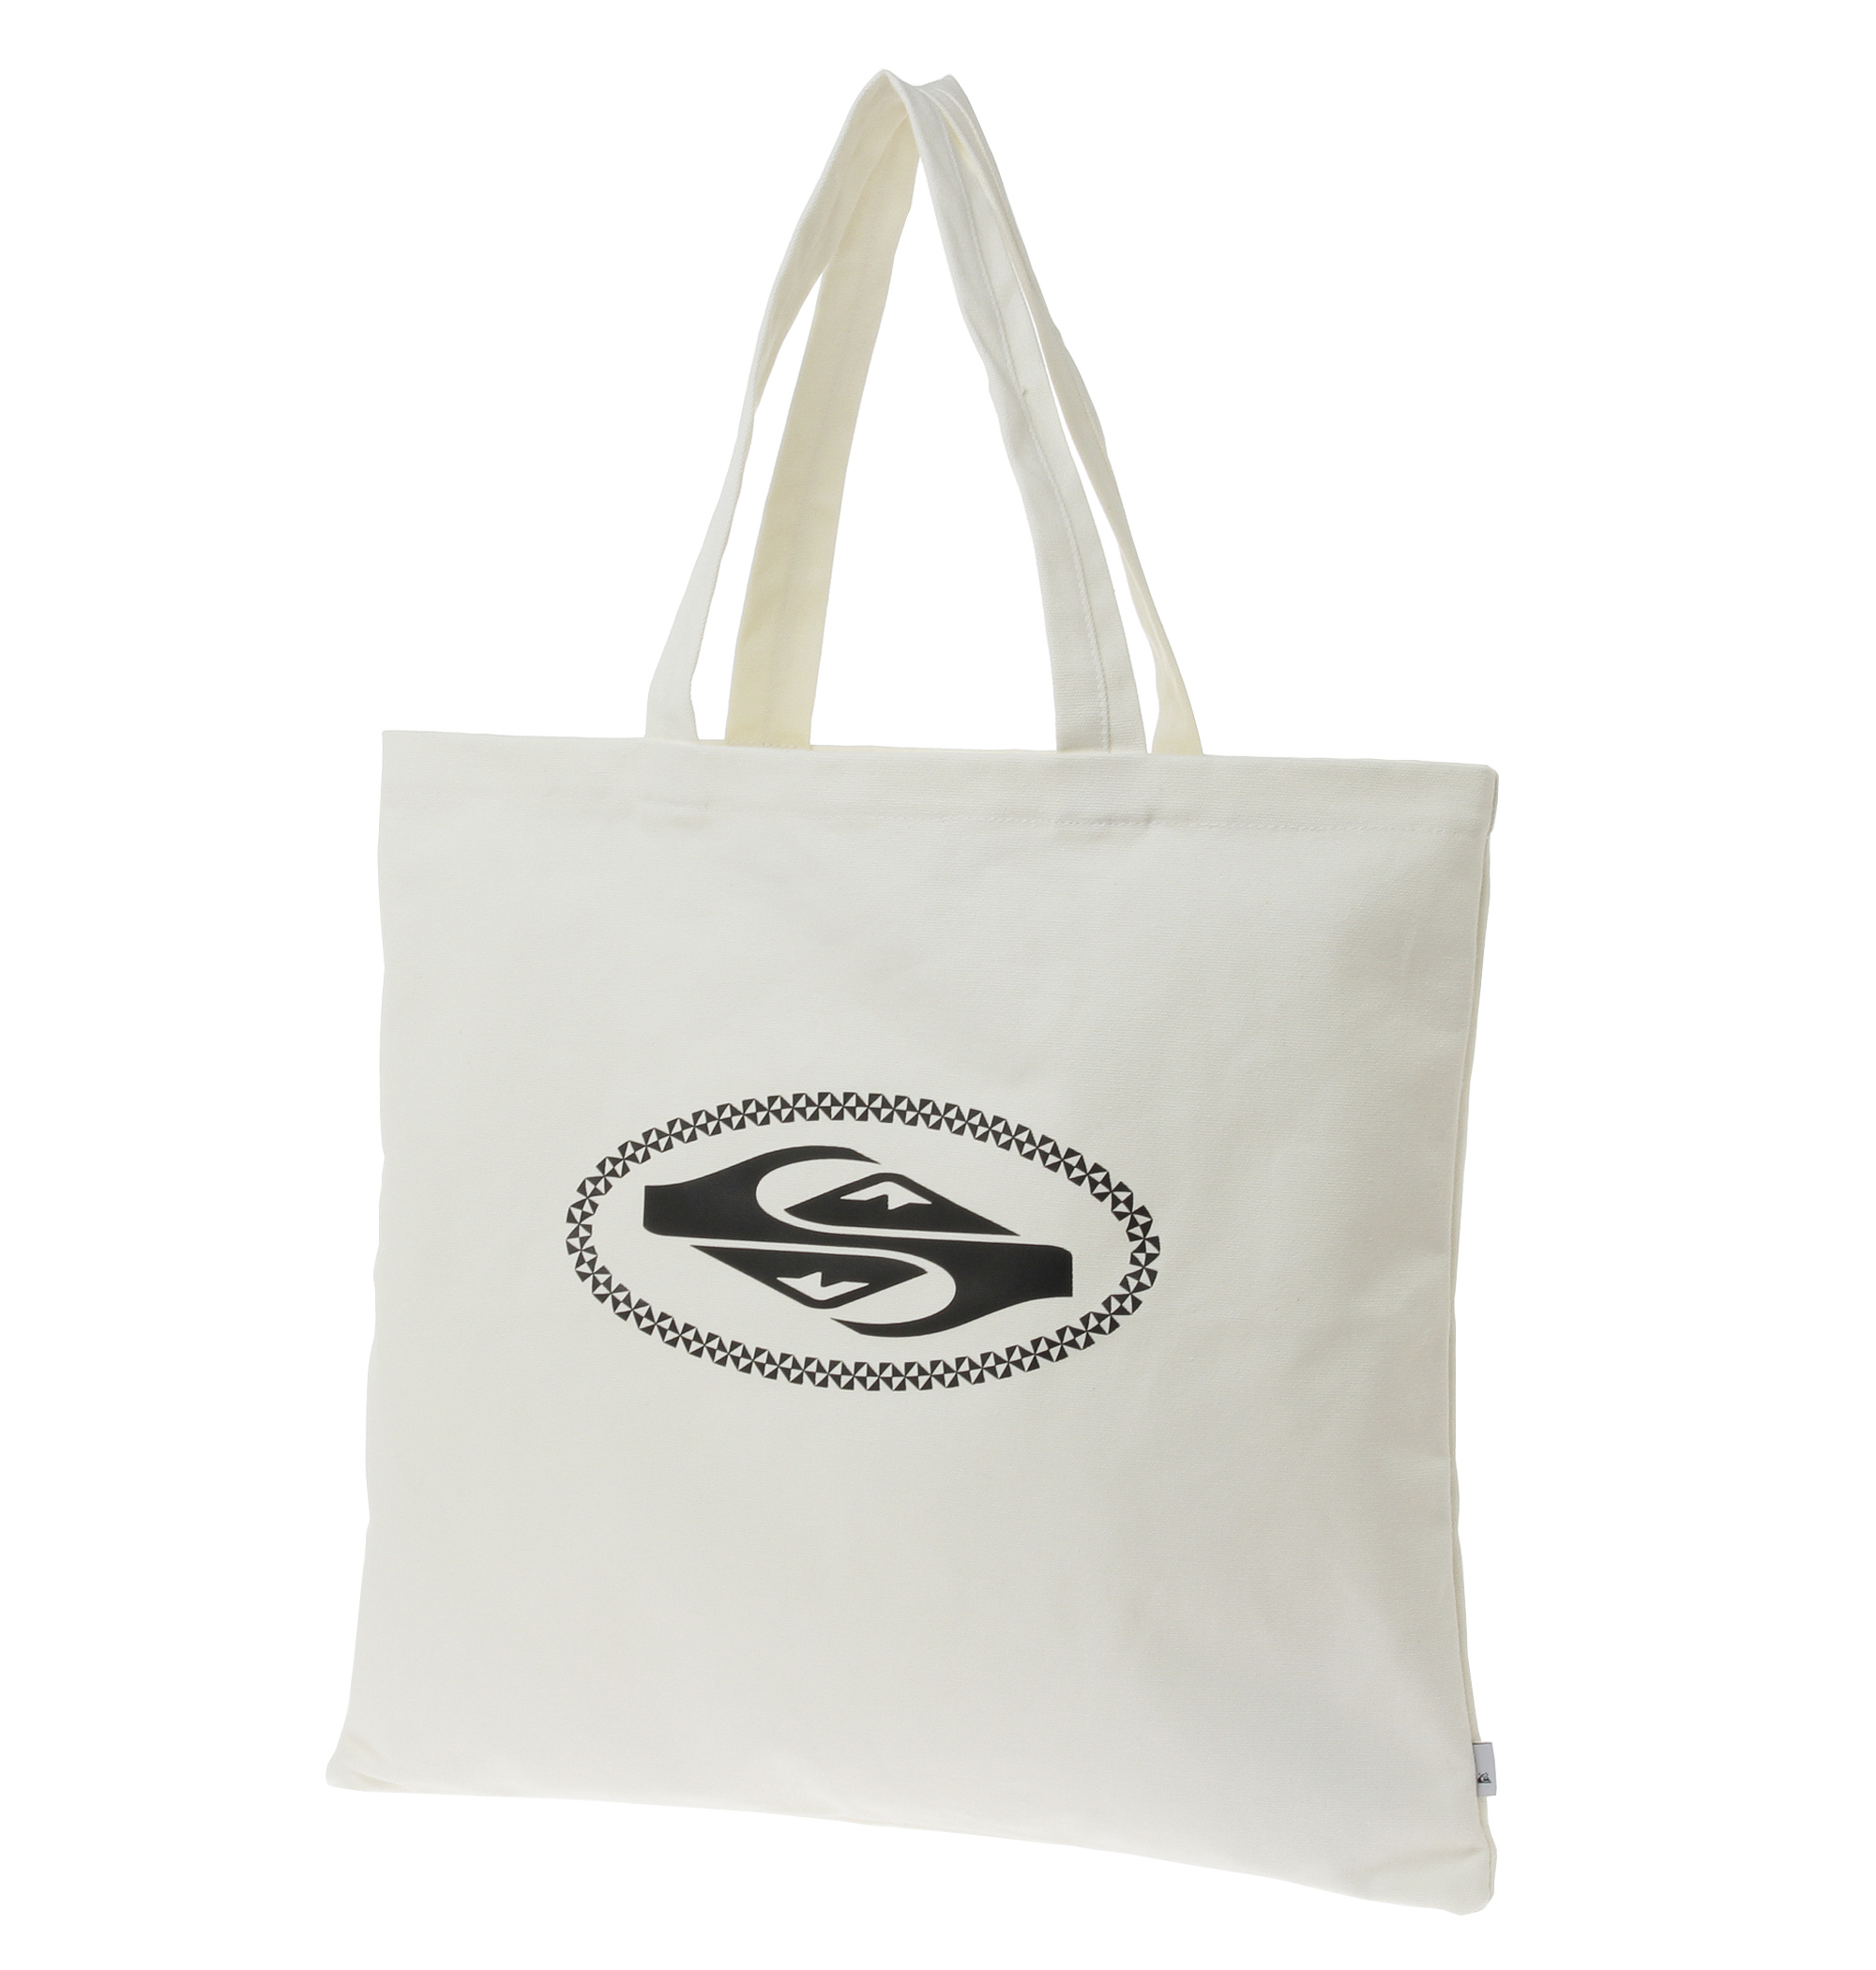 30%OFF！＜Quiksilver＞ THE CLASSIC TOTE 大きめサイズで使い勝手の良いトートバッグ画像